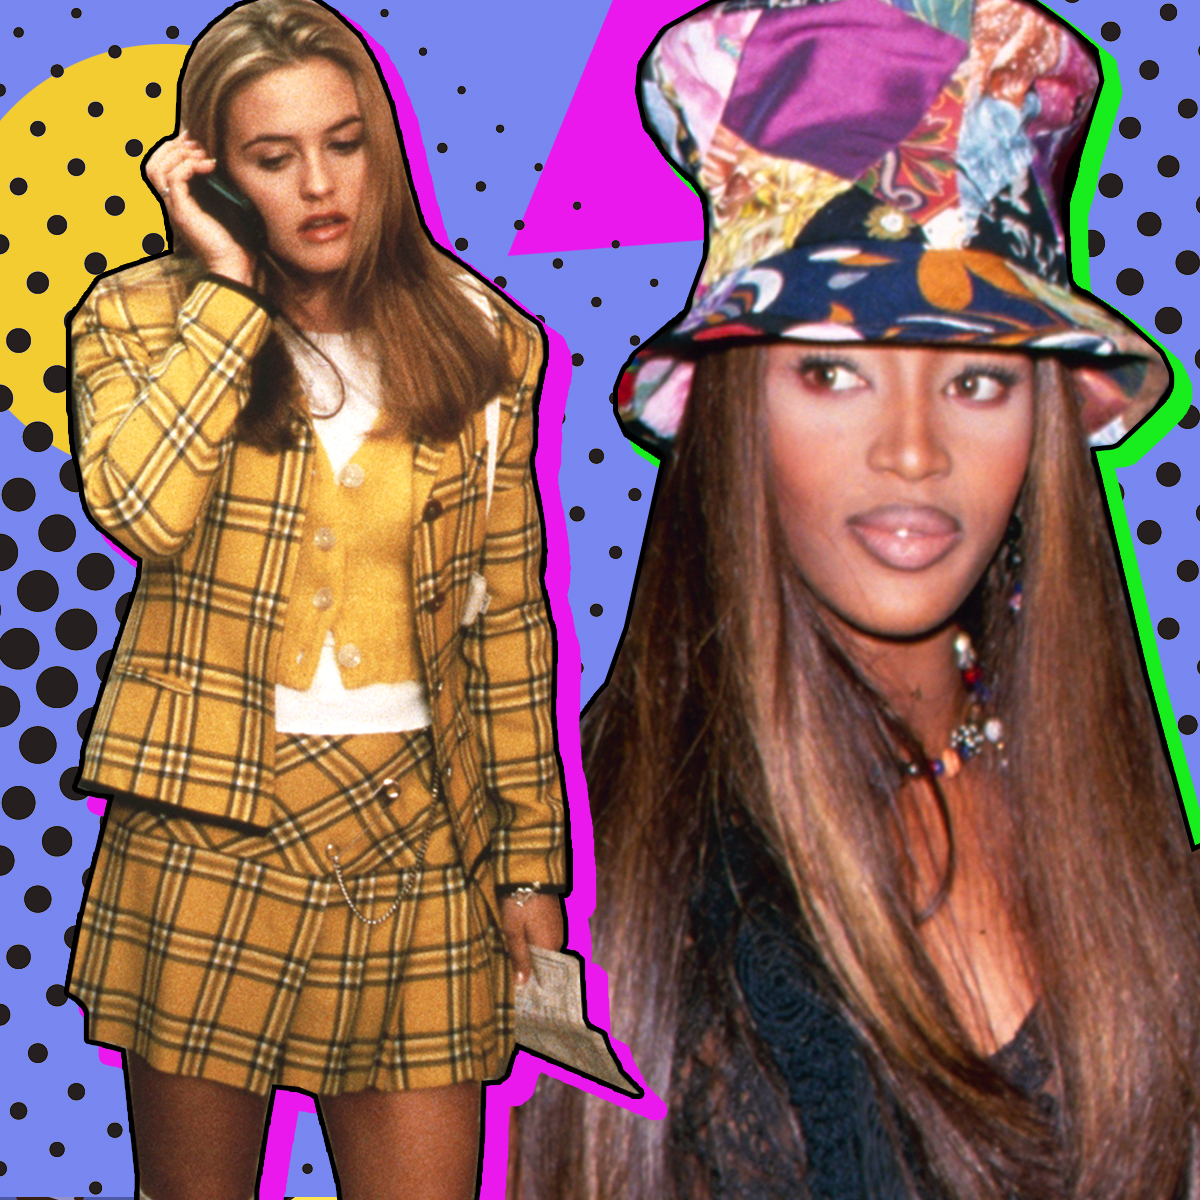 Shop These '90s Fashion Trends That Are Still Popular Today